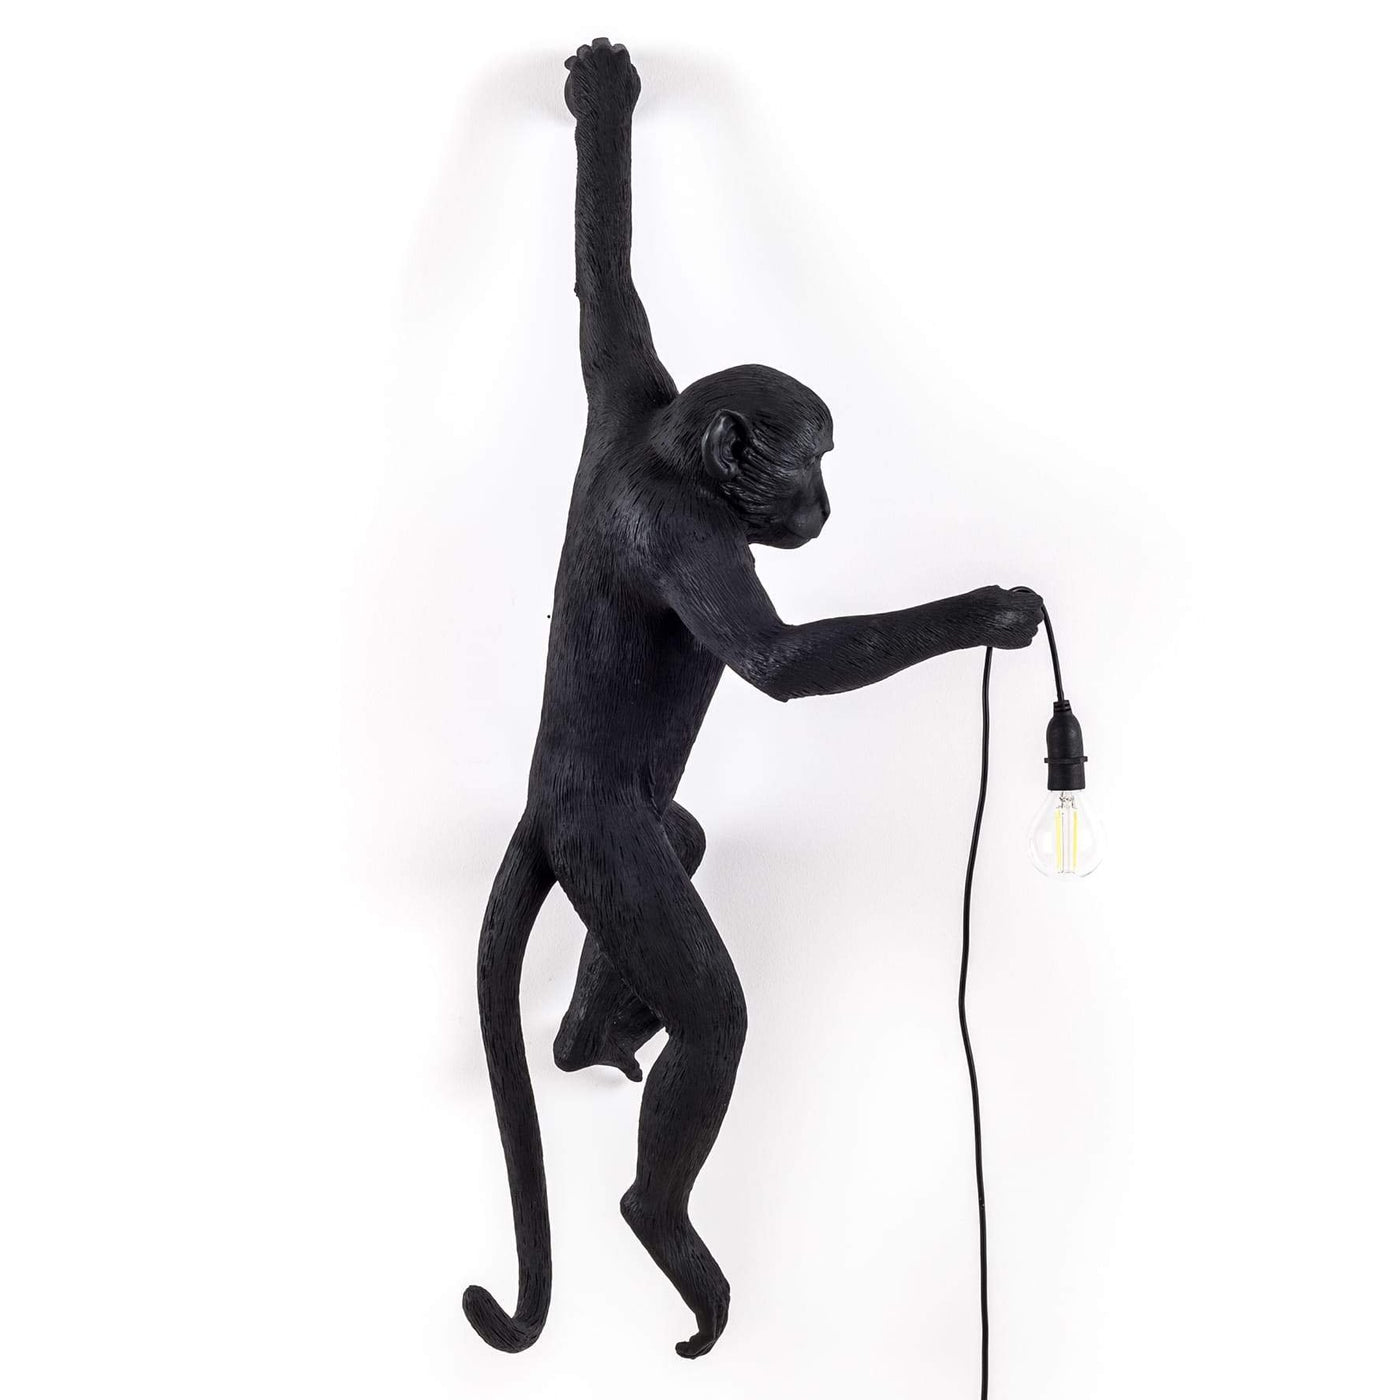 The Monkey Lamp Black - Hanging Version by Seletti